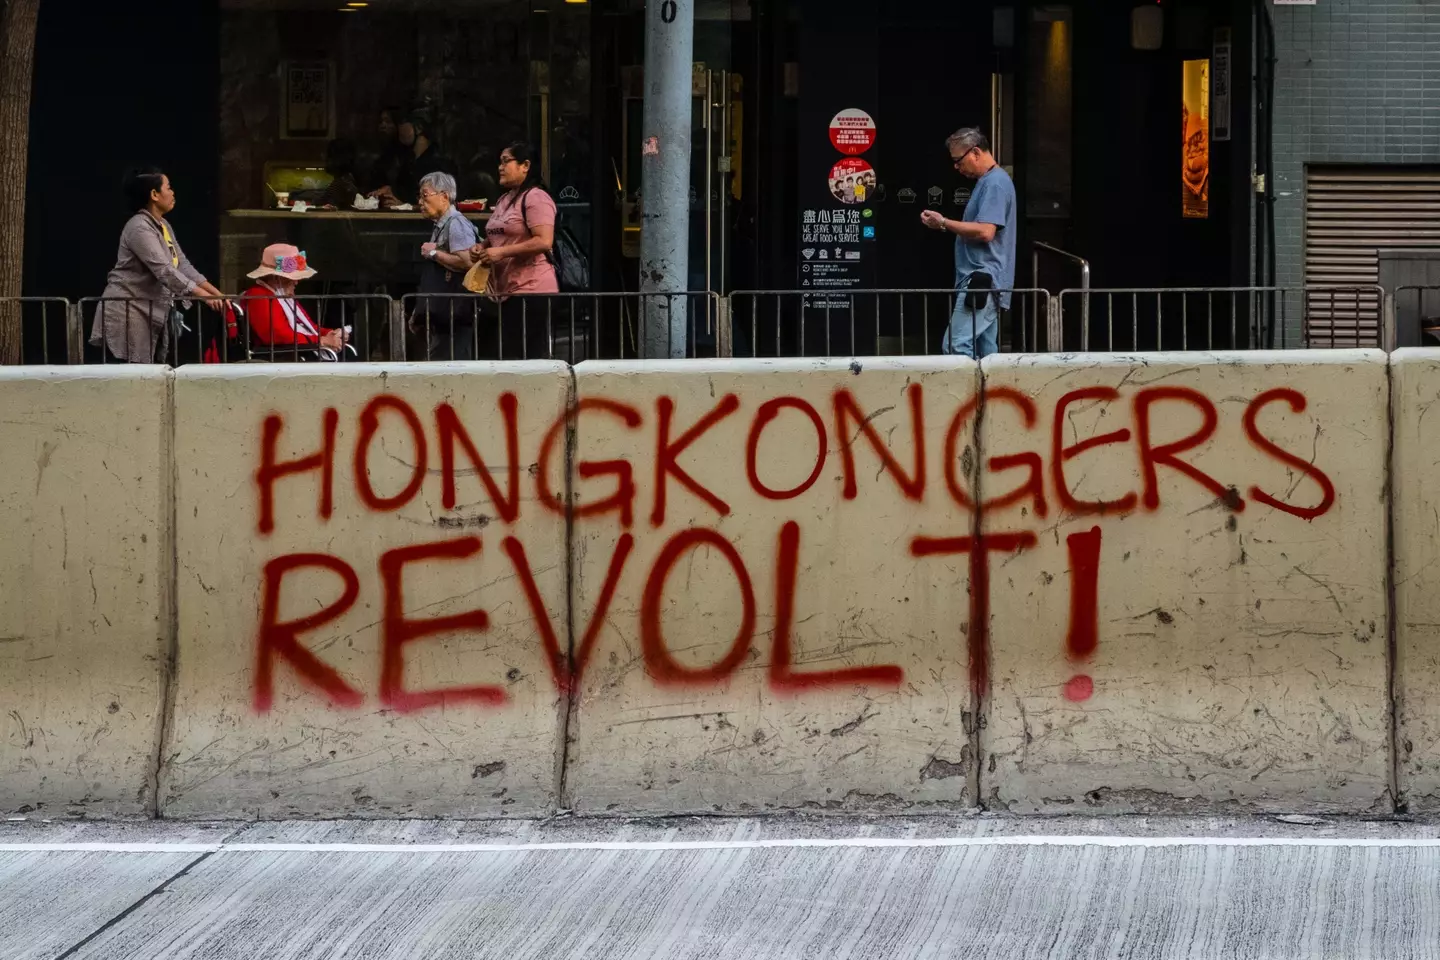 A man who attacked four people during the 2019 Hong Kong protests has been sentenced to prison.